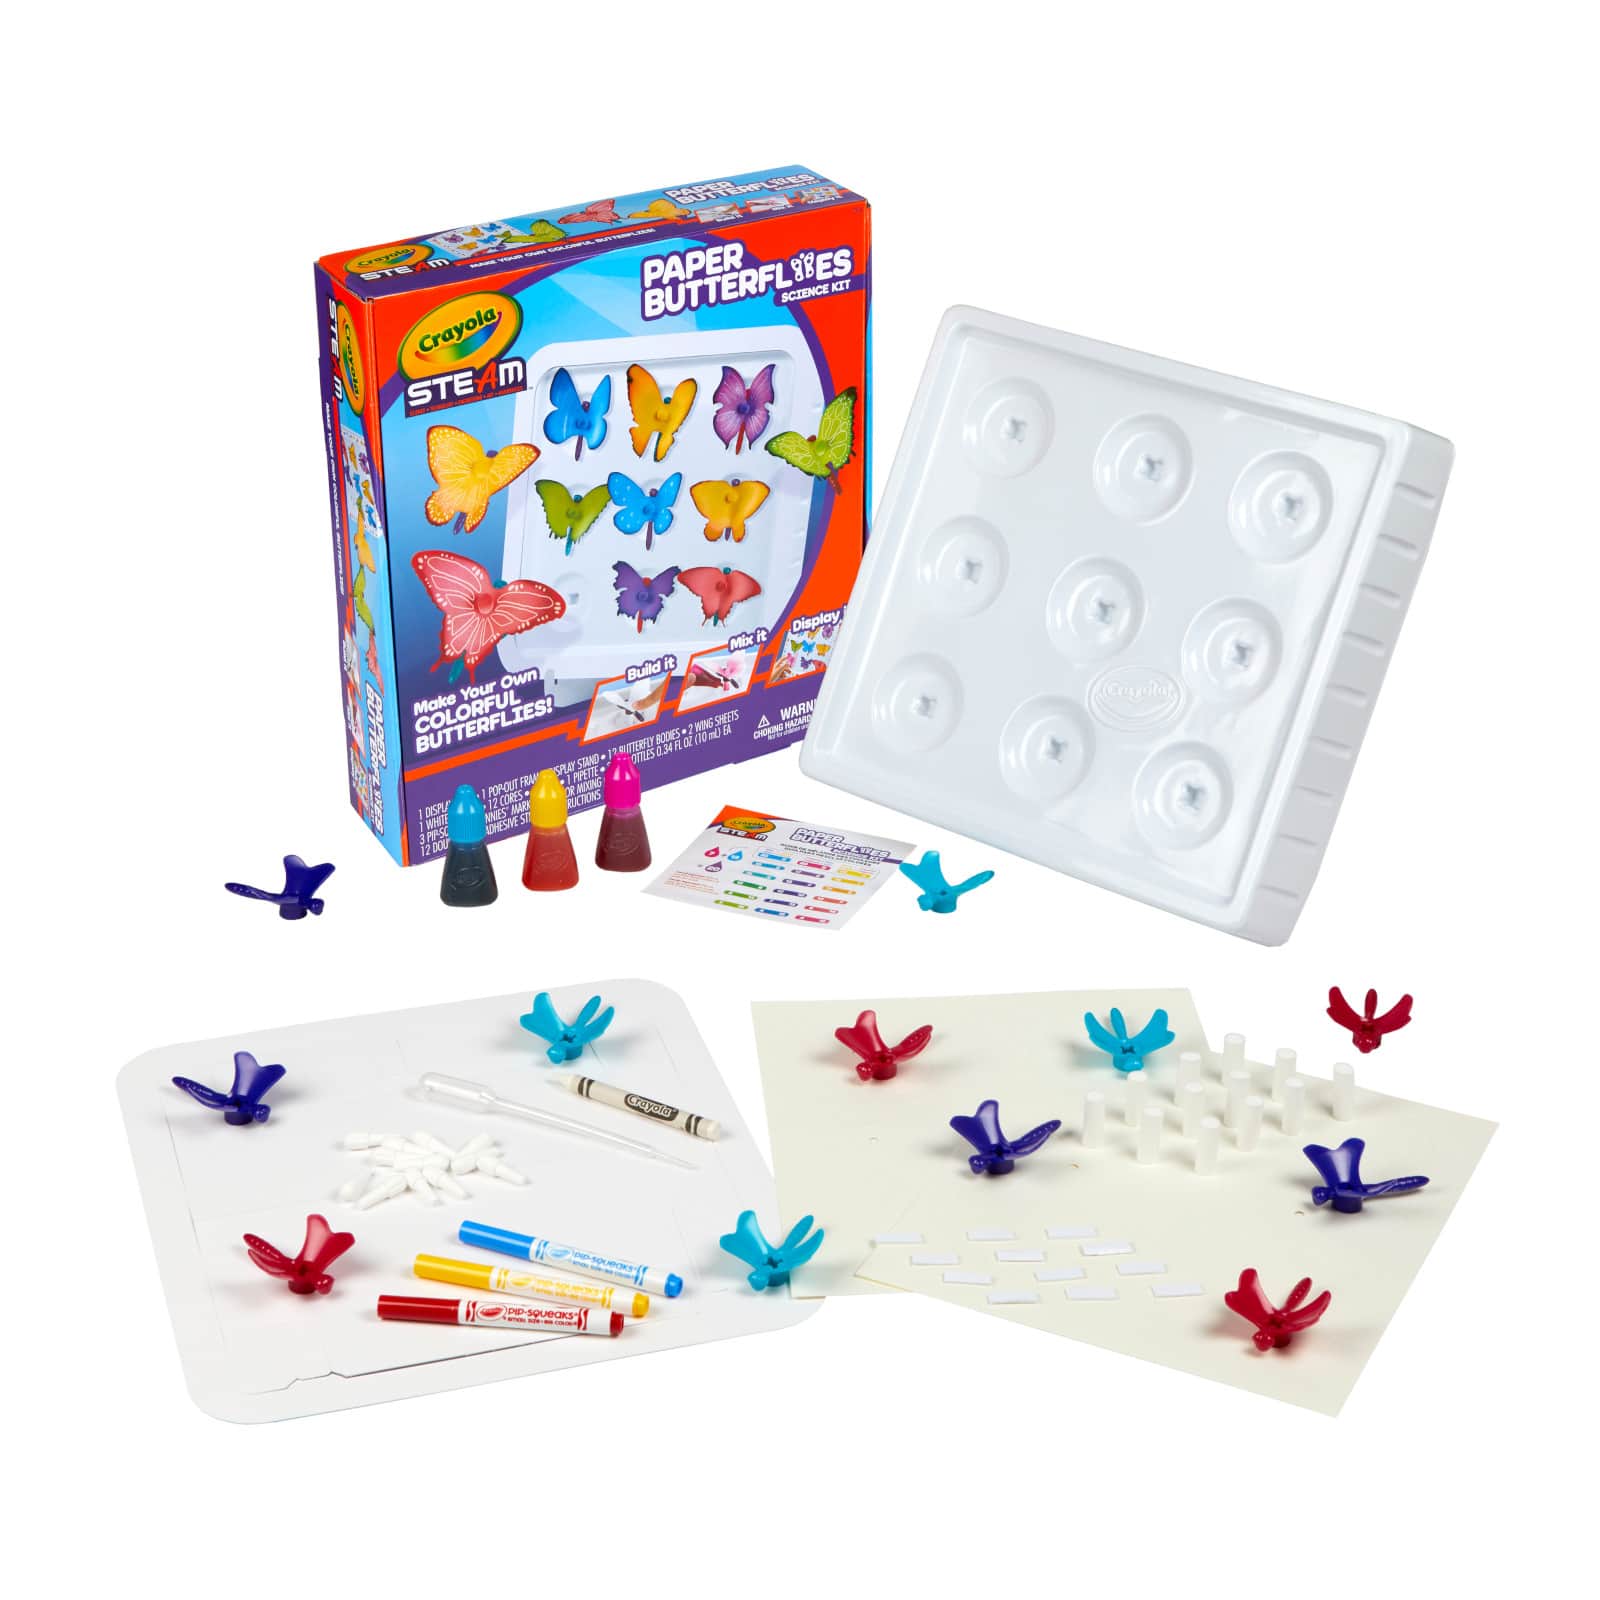 Crayola&#xAE; S.T.E.A.M. Paper Butterflies Science Kit